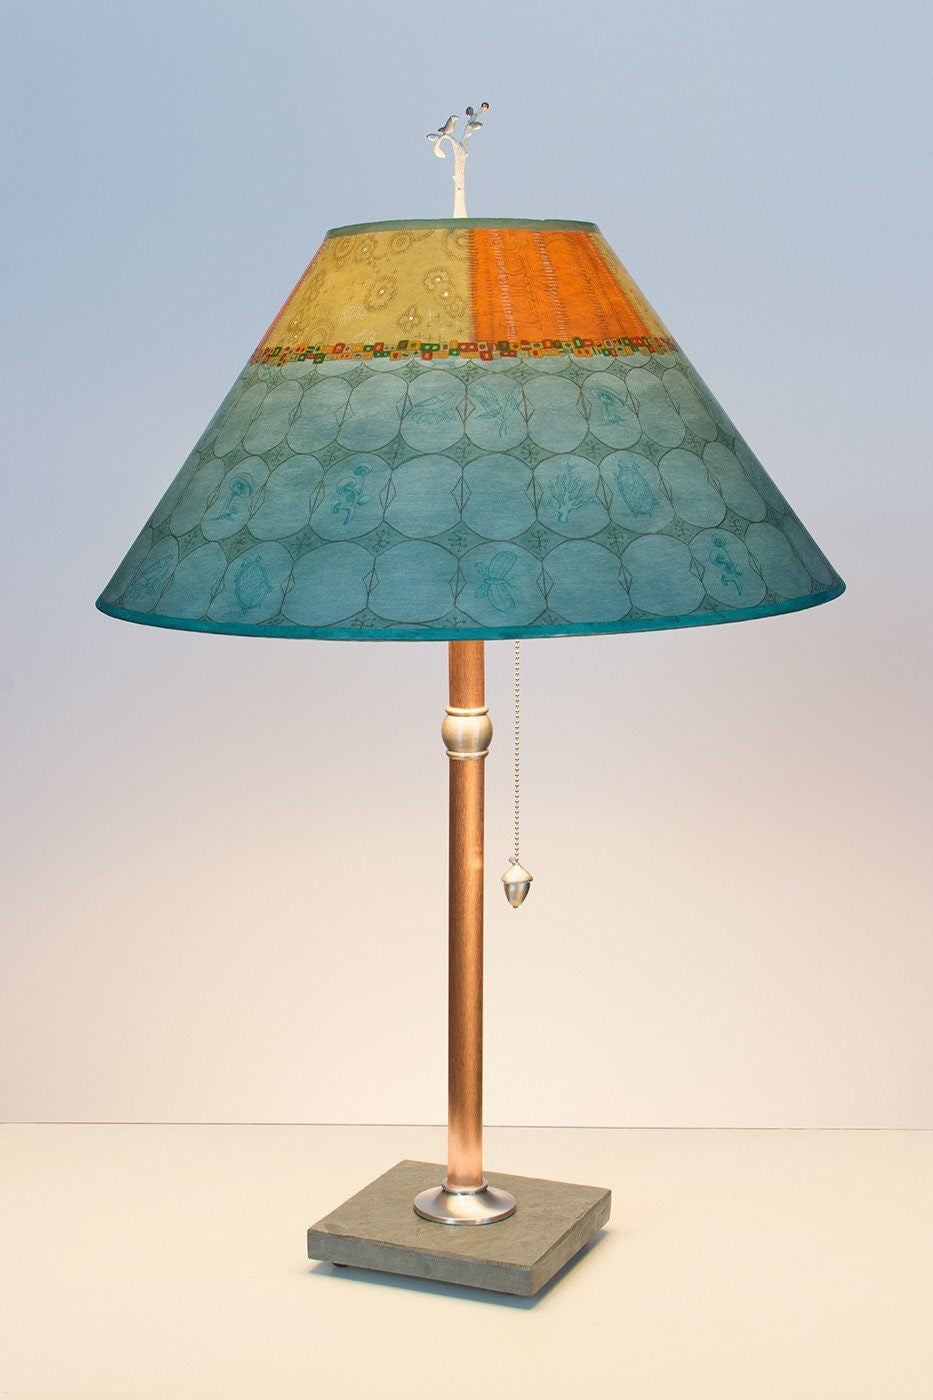 Copper Table Lamp on Vermont Slate with Large Conical Shade in Paradise Pool